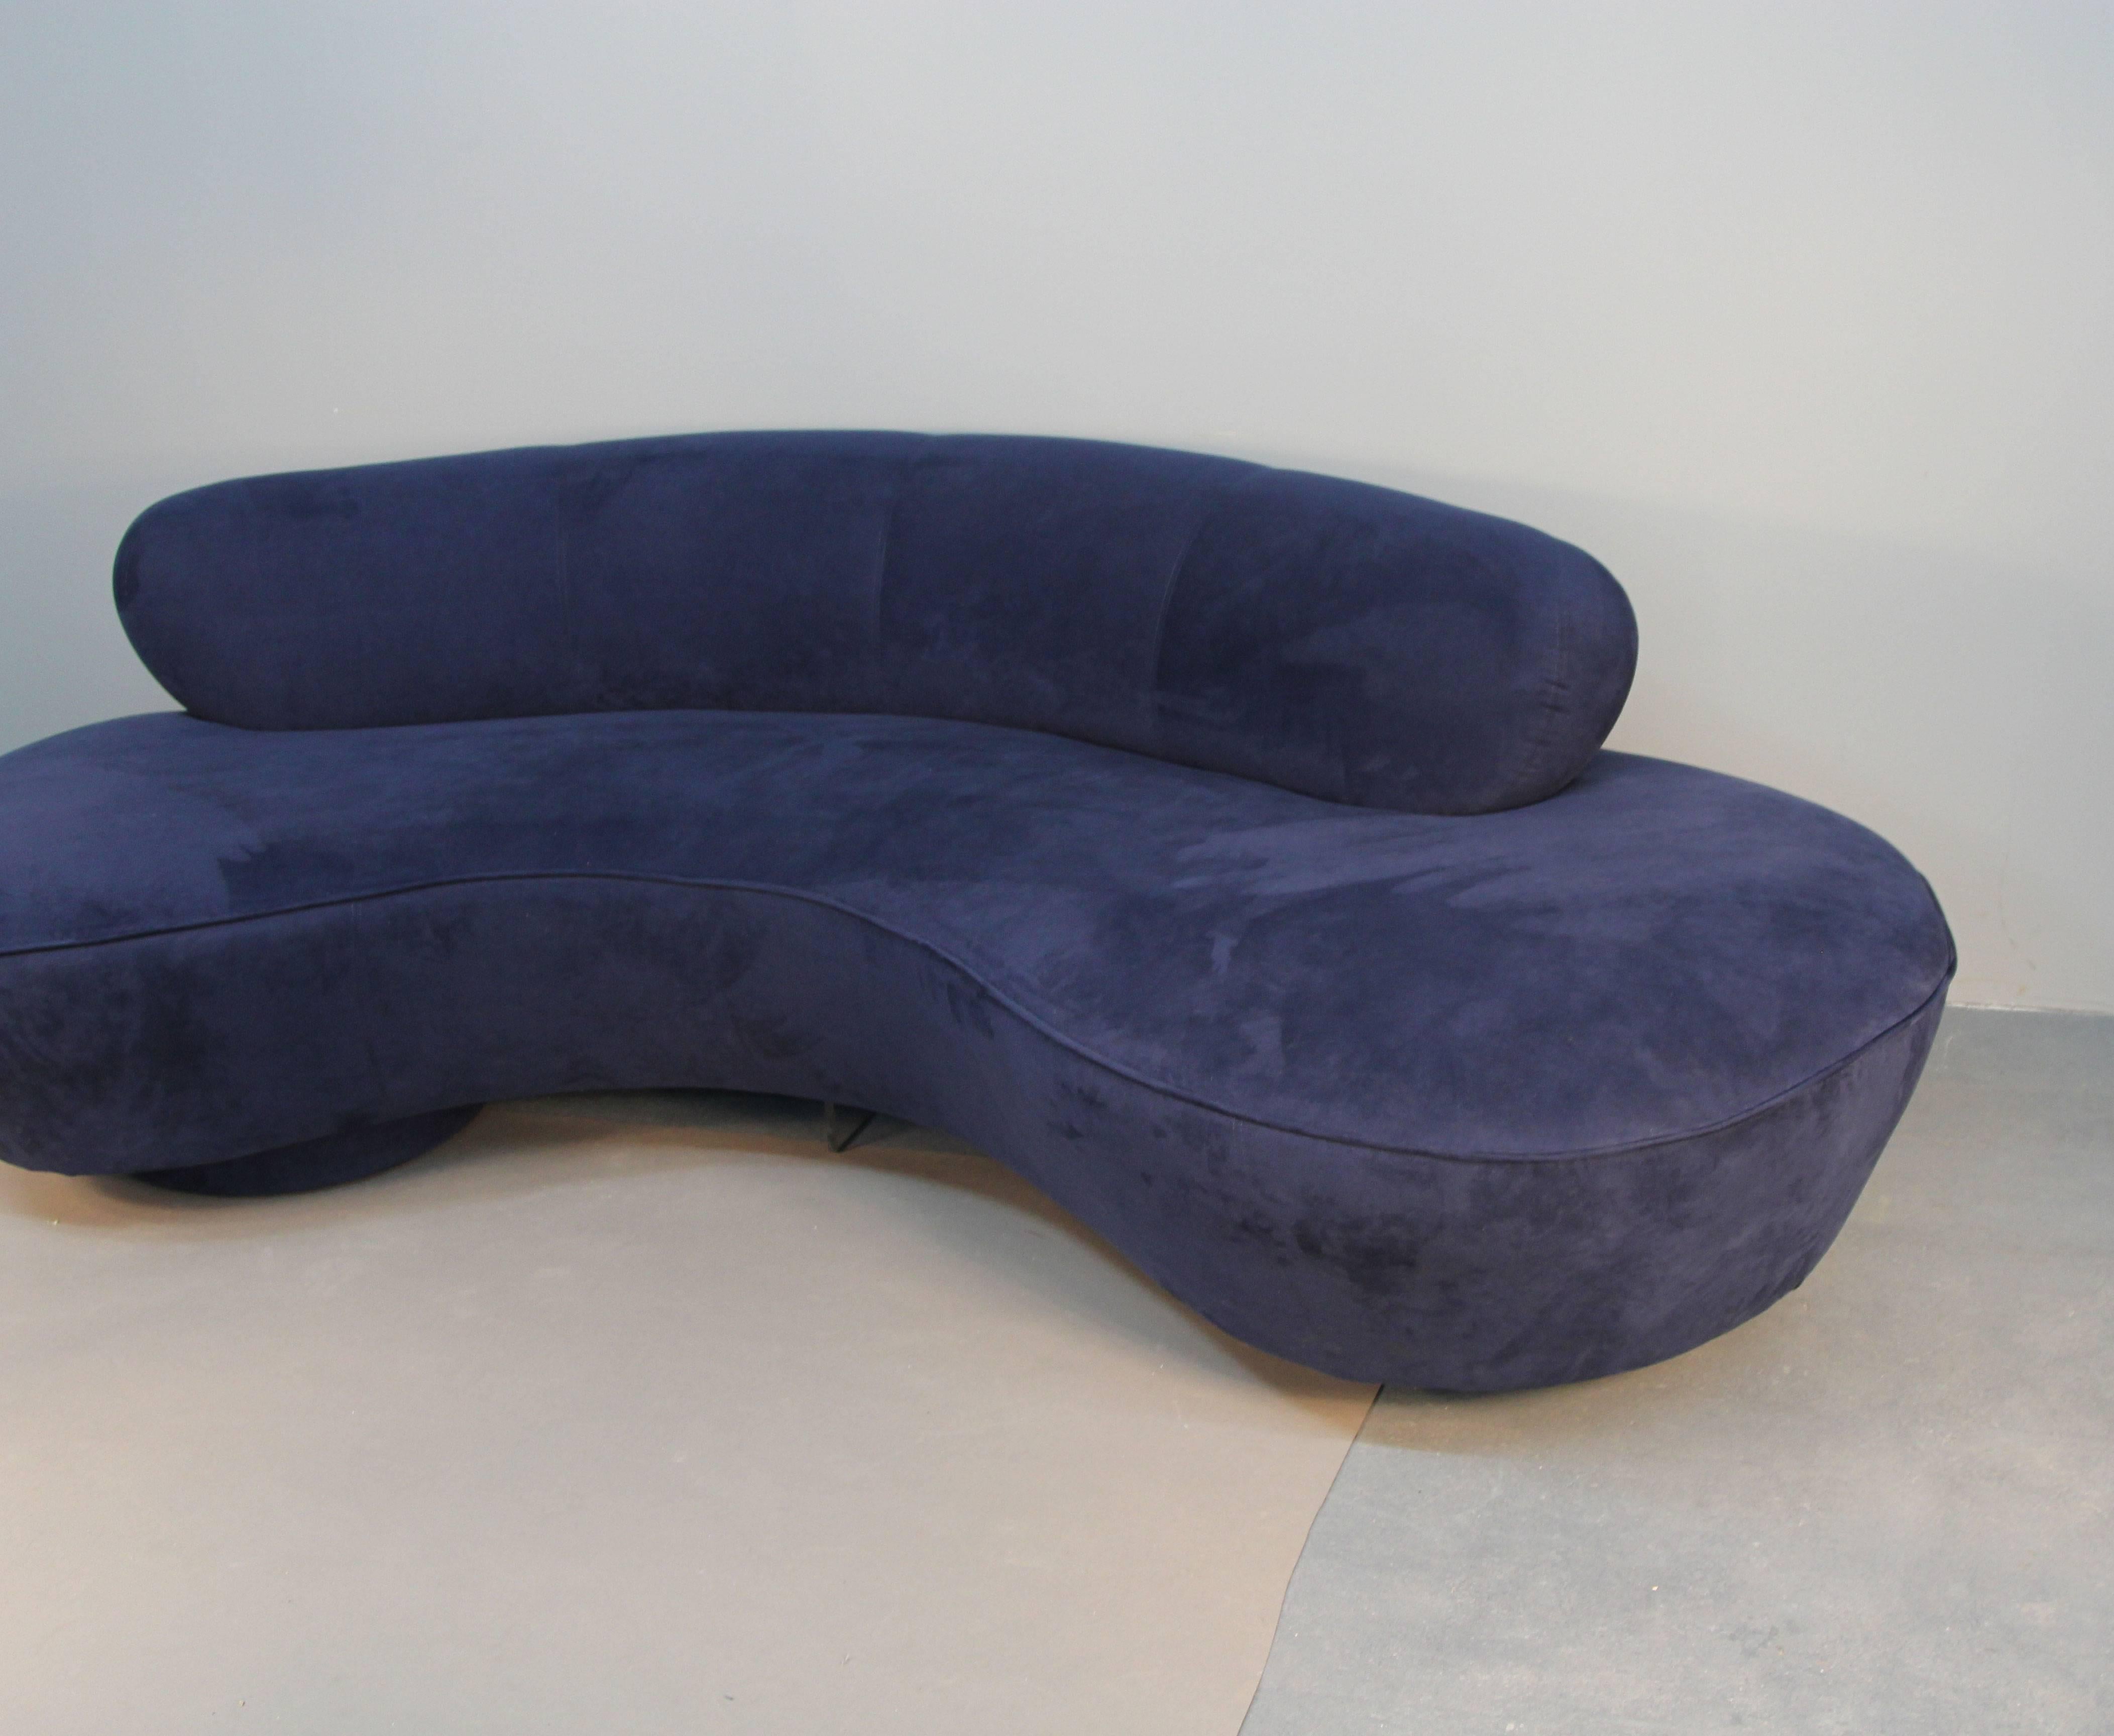 Vladimir Kagan cloud sofa, in navy blue ultrasuede. With Lucite center support.